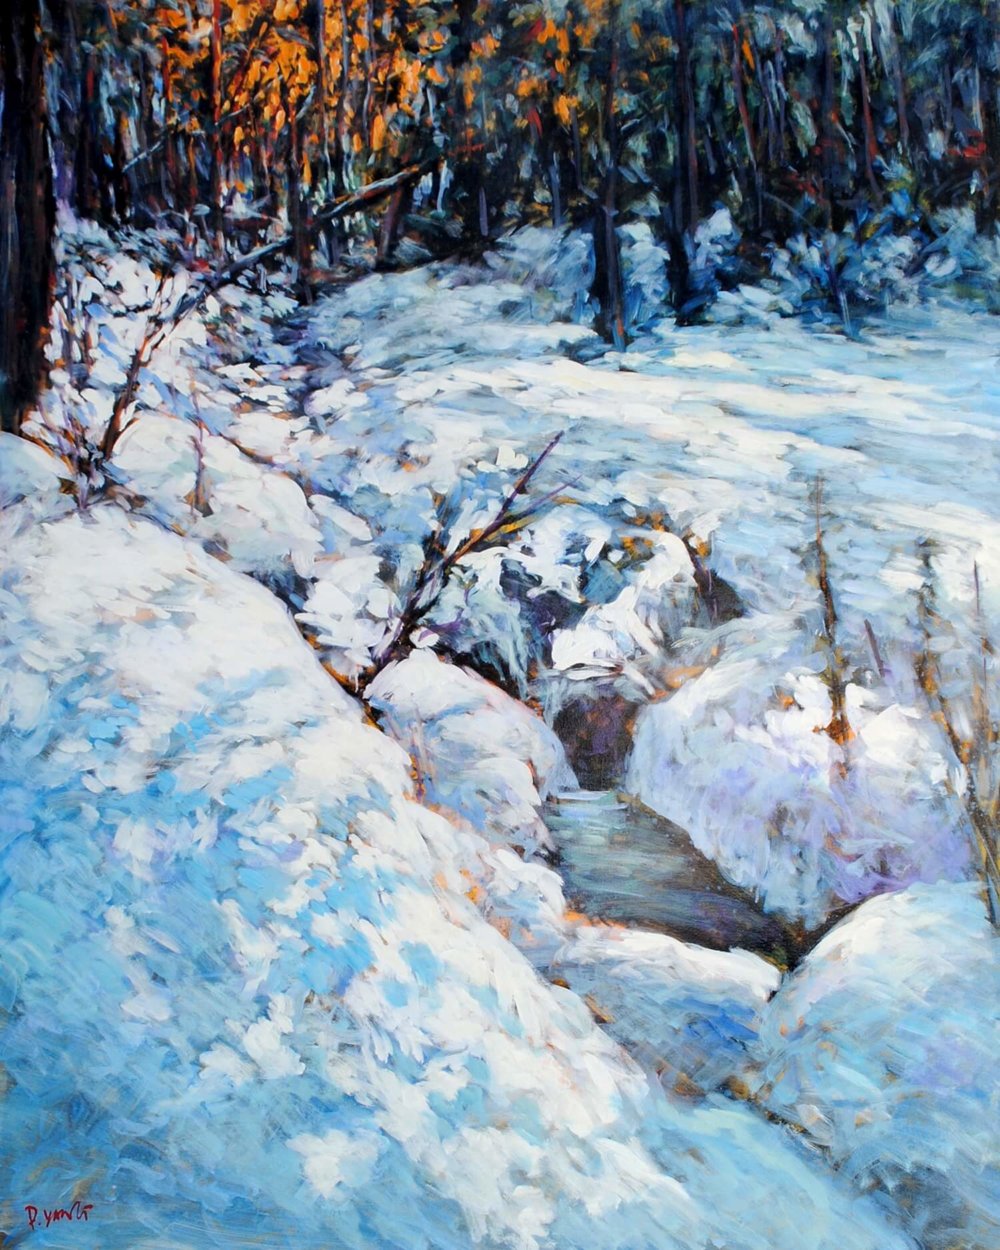 First Snow In The Woods by Pei Yang